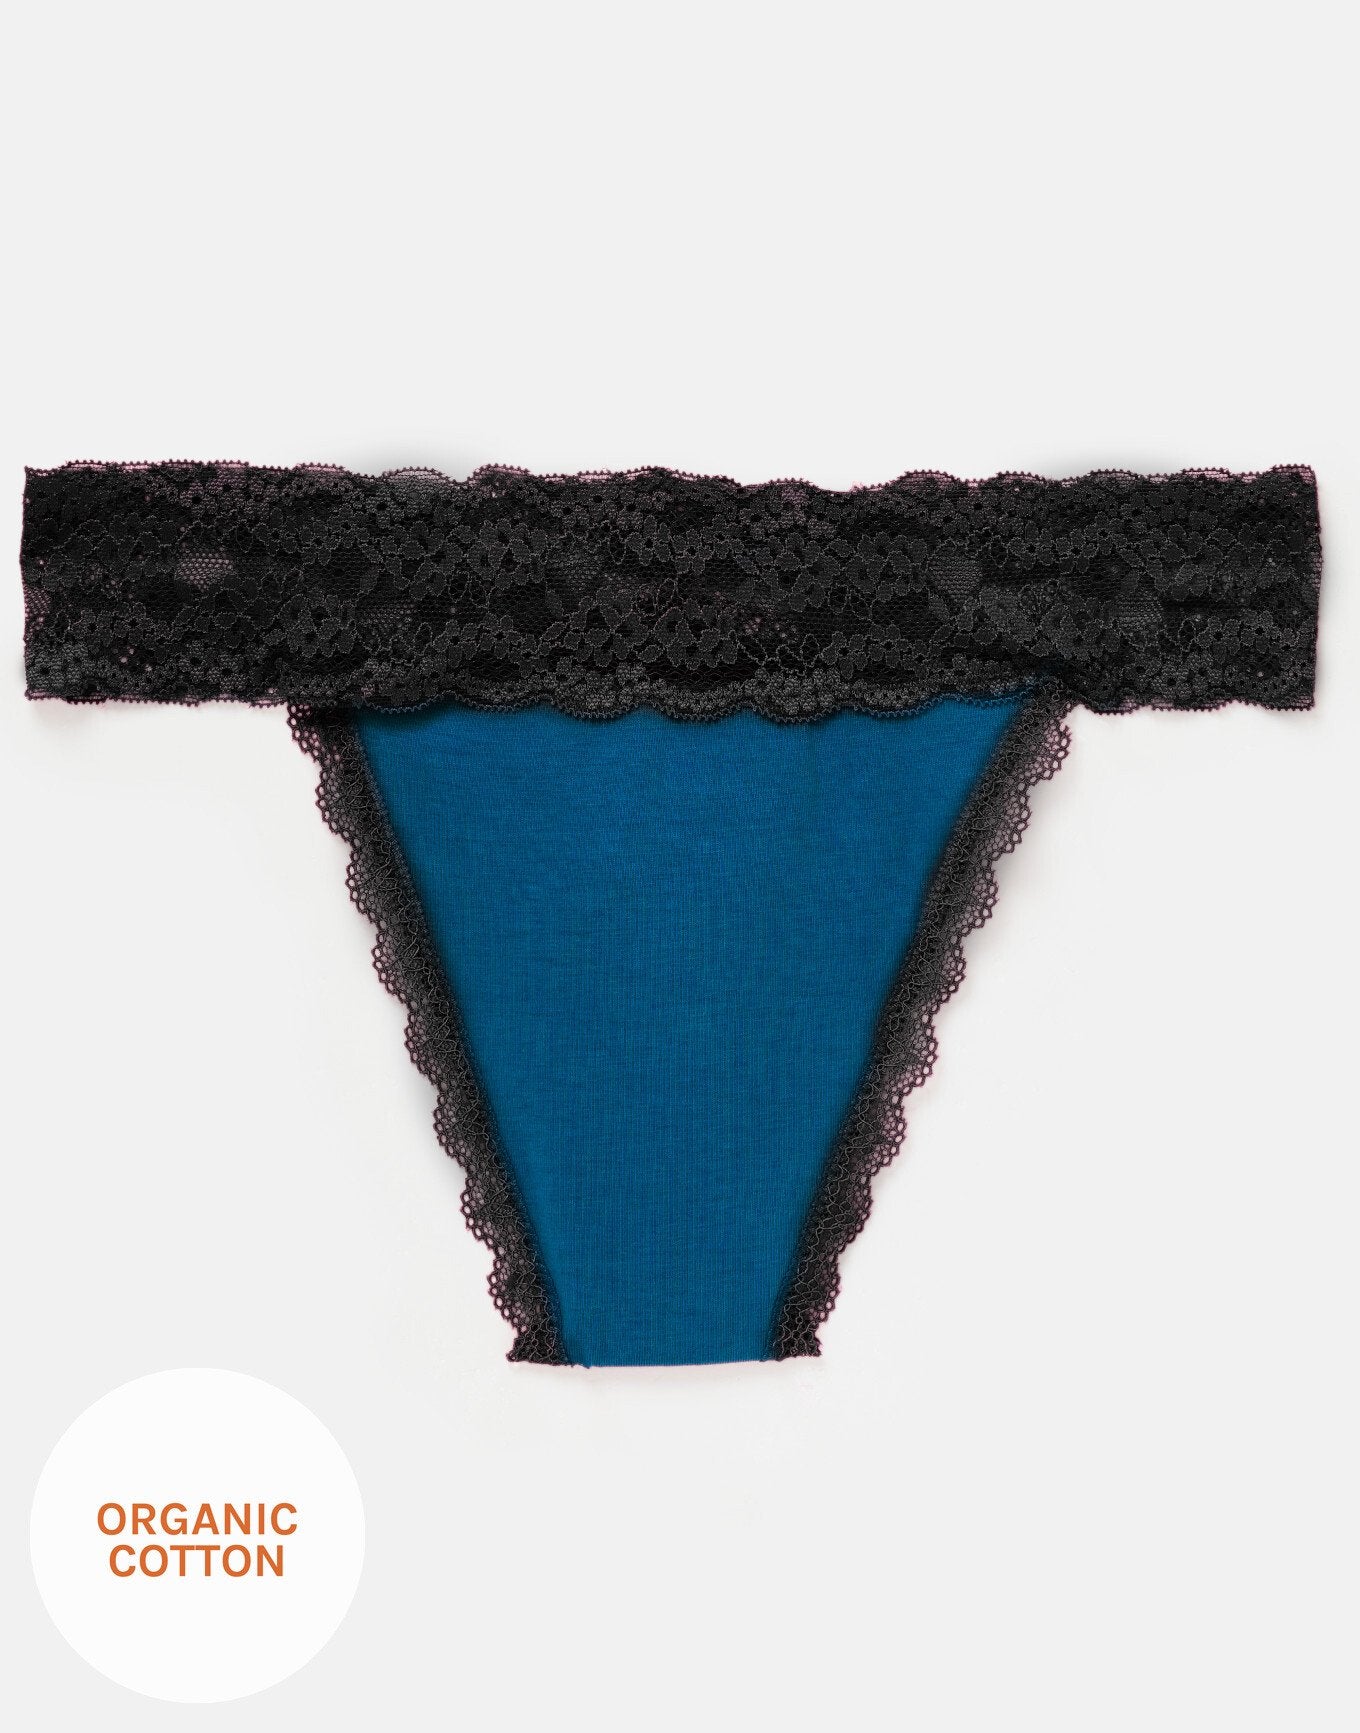 Joyja Lily period-proof panty in color Classic Blue and shape thong